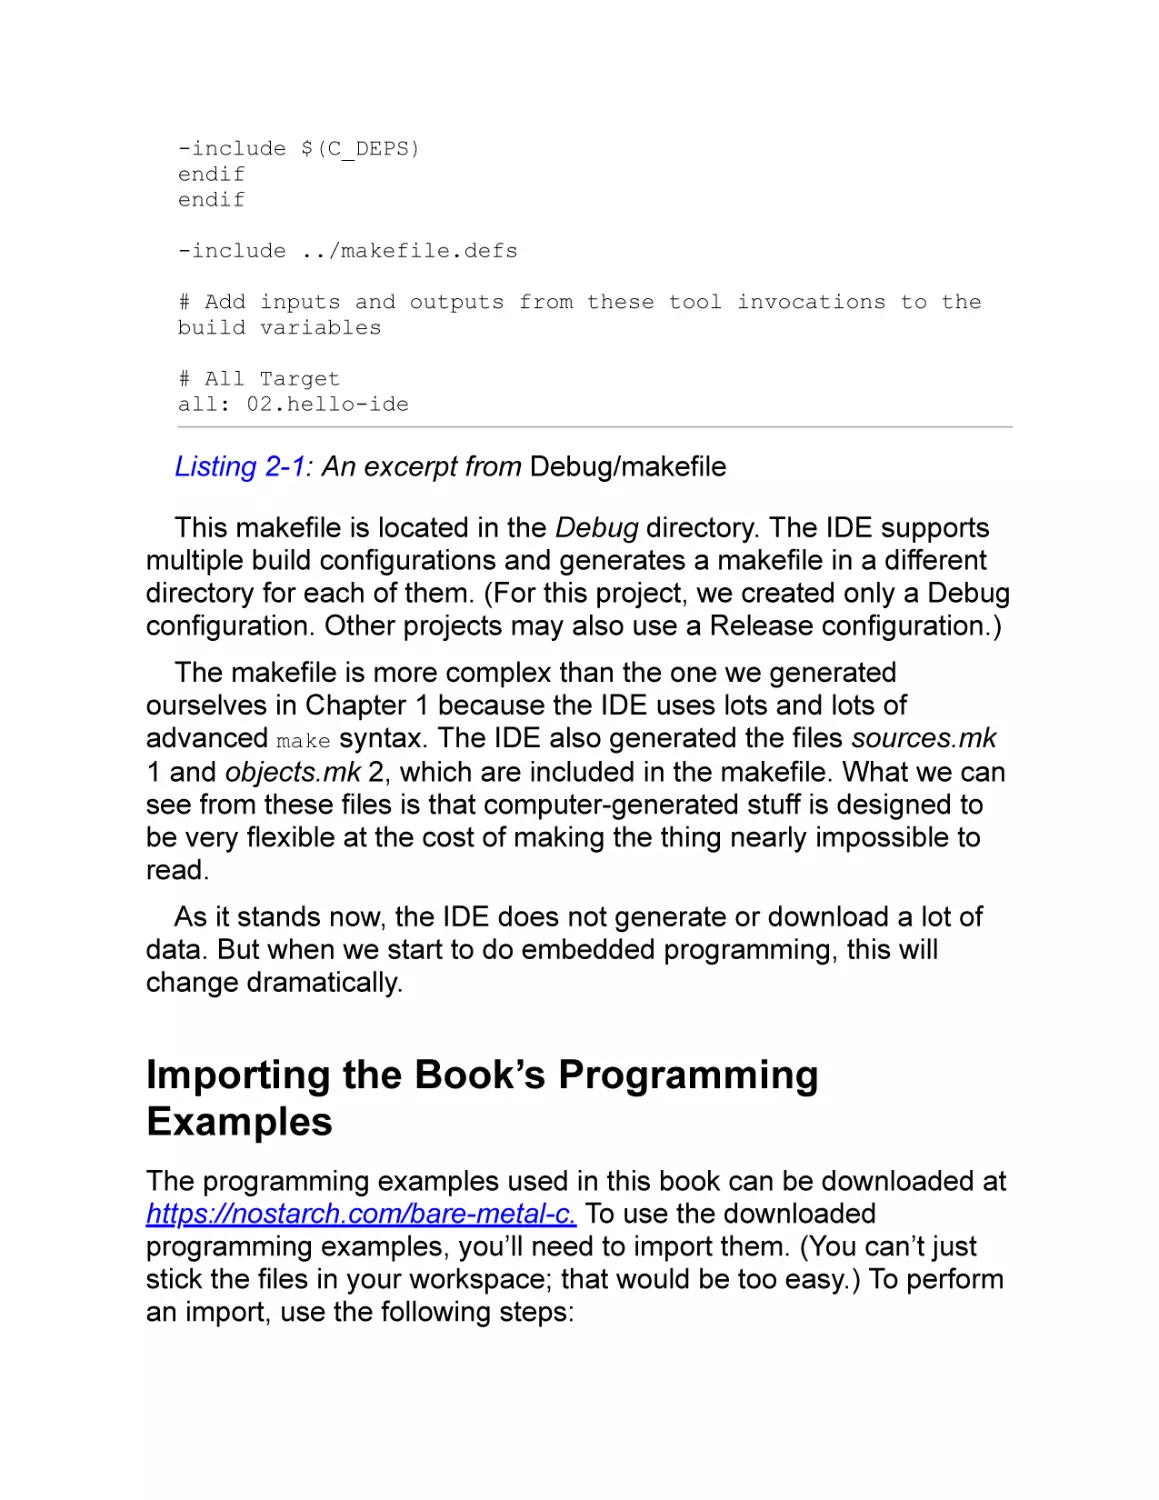 Importing the Book’s Programming Examples